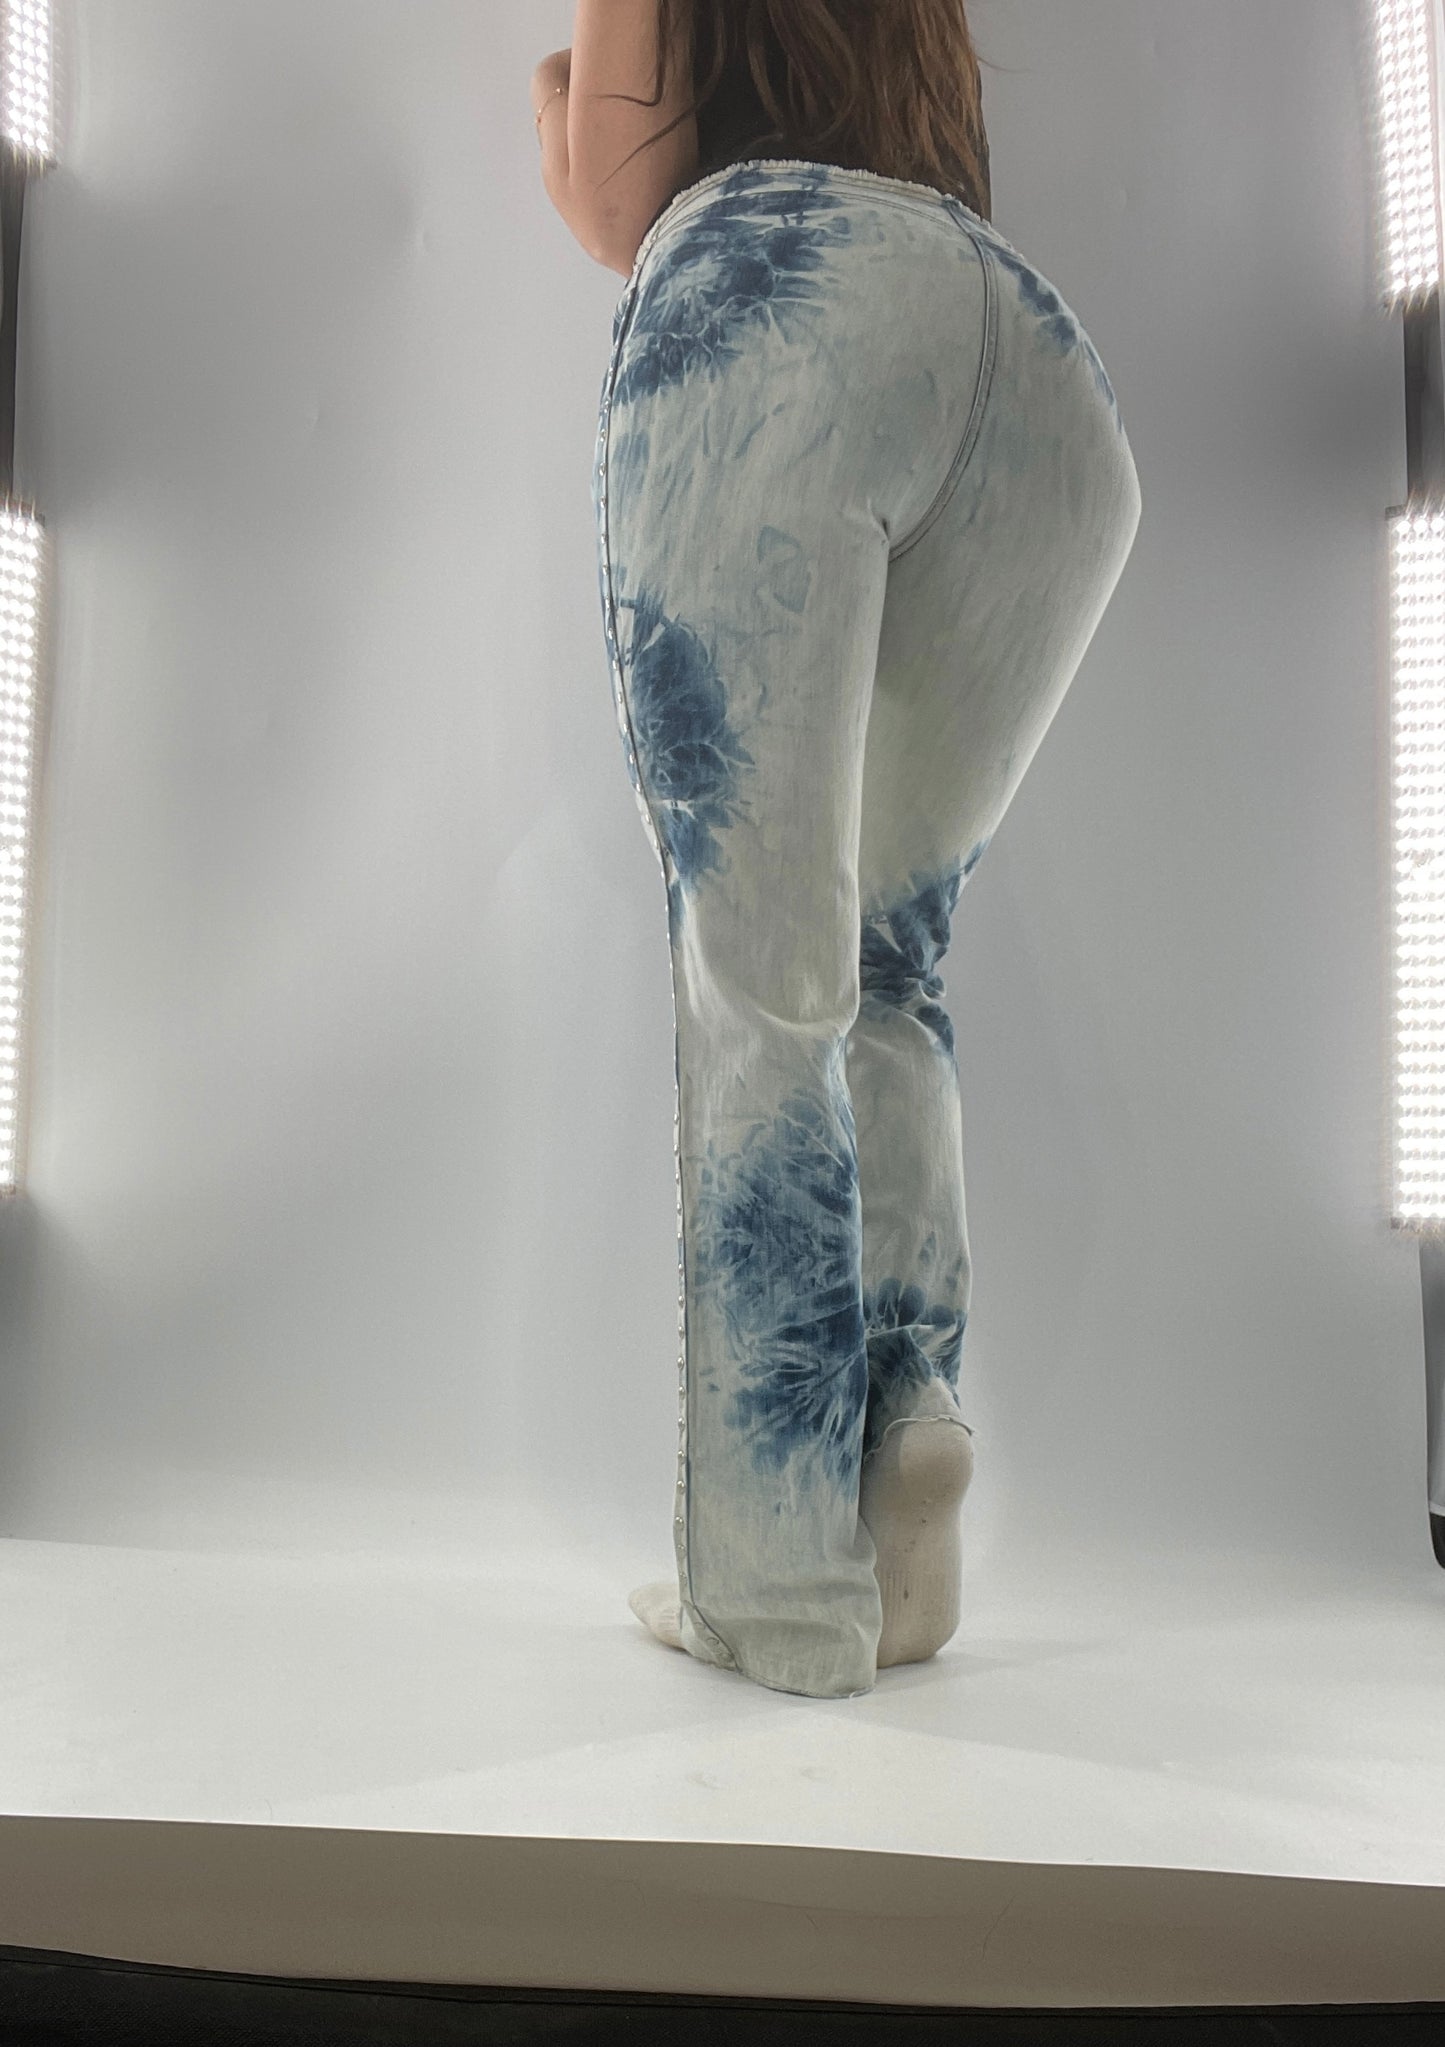 Vintage 1990s DKNY Light Bleached Jeans with Tie Dye Denim Pattern, Raw Edge Low Rise, and Studded Sides (5)